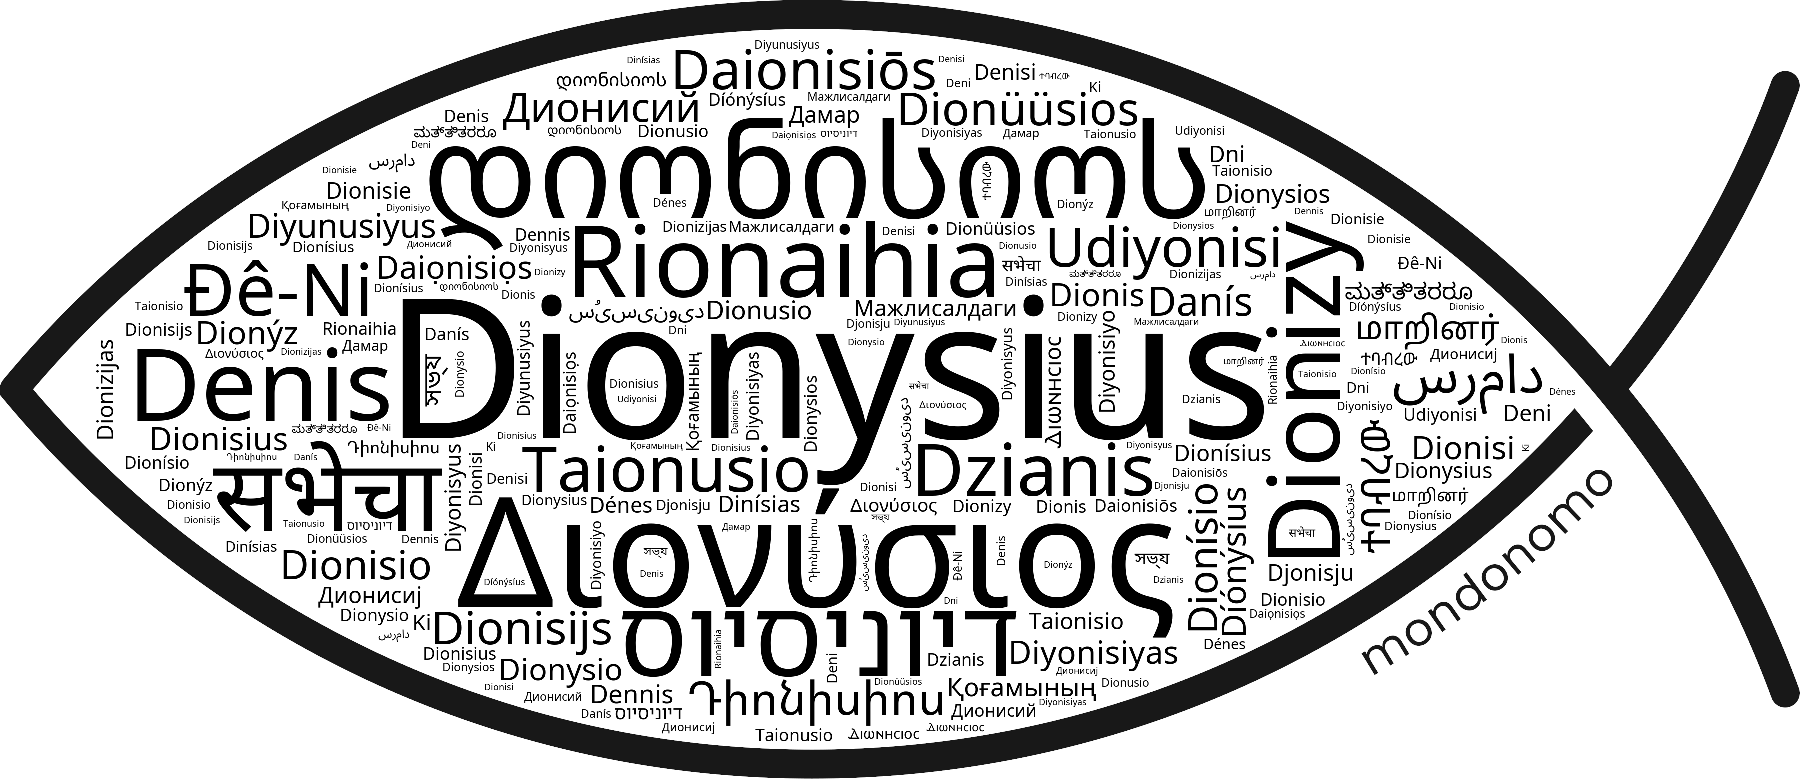 Name Dionysius in the world's Bibles